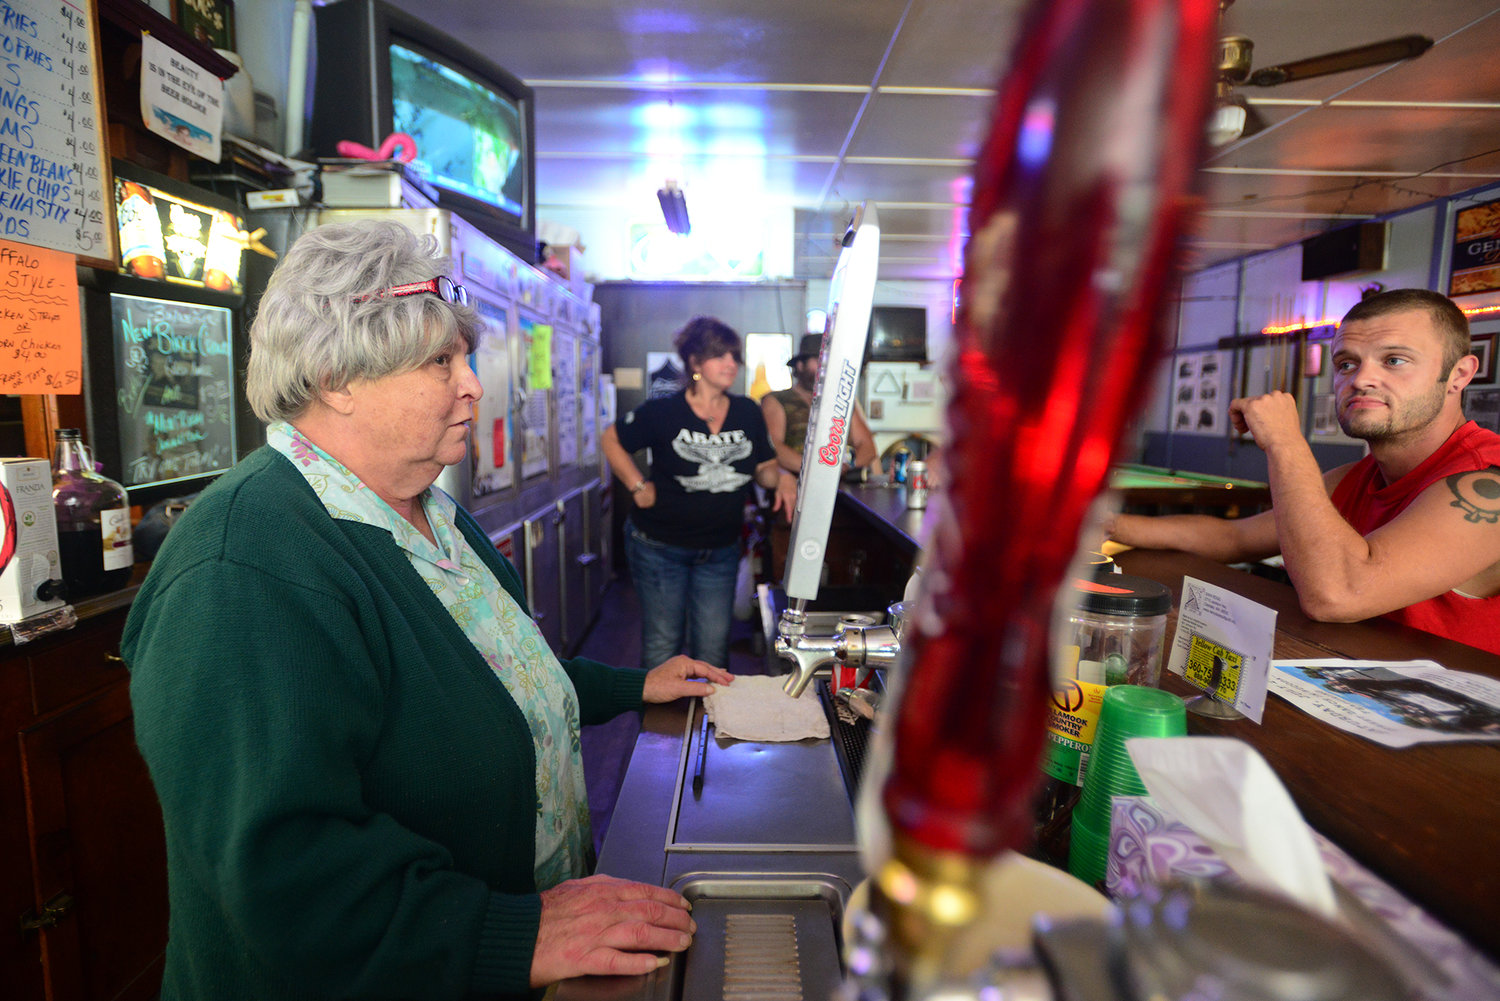 Judy Wall stands behind the bar on Wednesday, July 10, 2013.